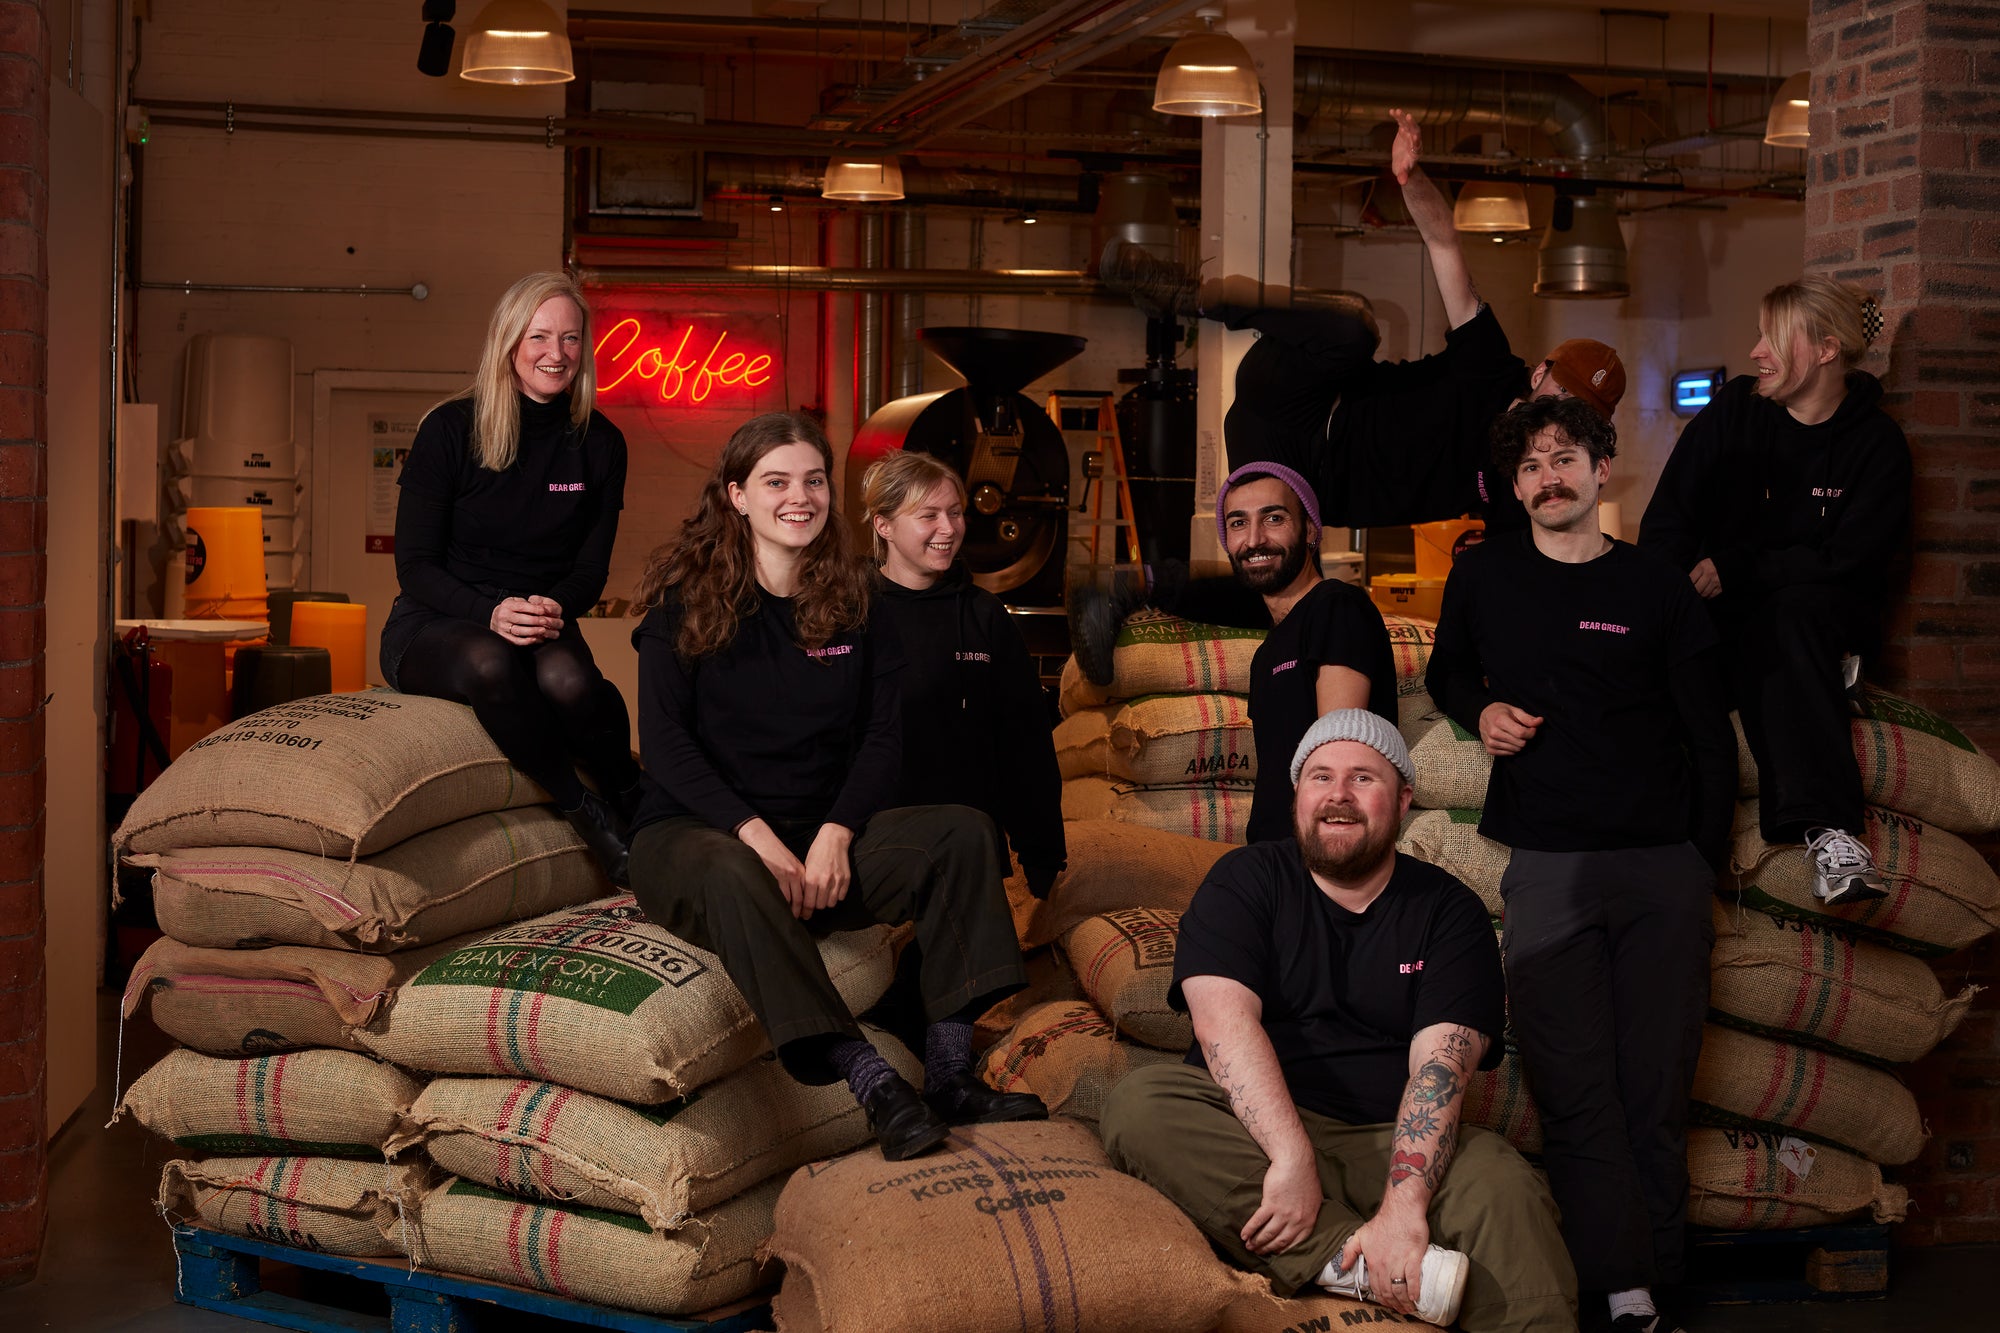 The staff members of Dear Green sitting on bags of raw green coffee beans. There are 7 staff members in the photo, all wearing black Dear Green tops and smiling at the camera.